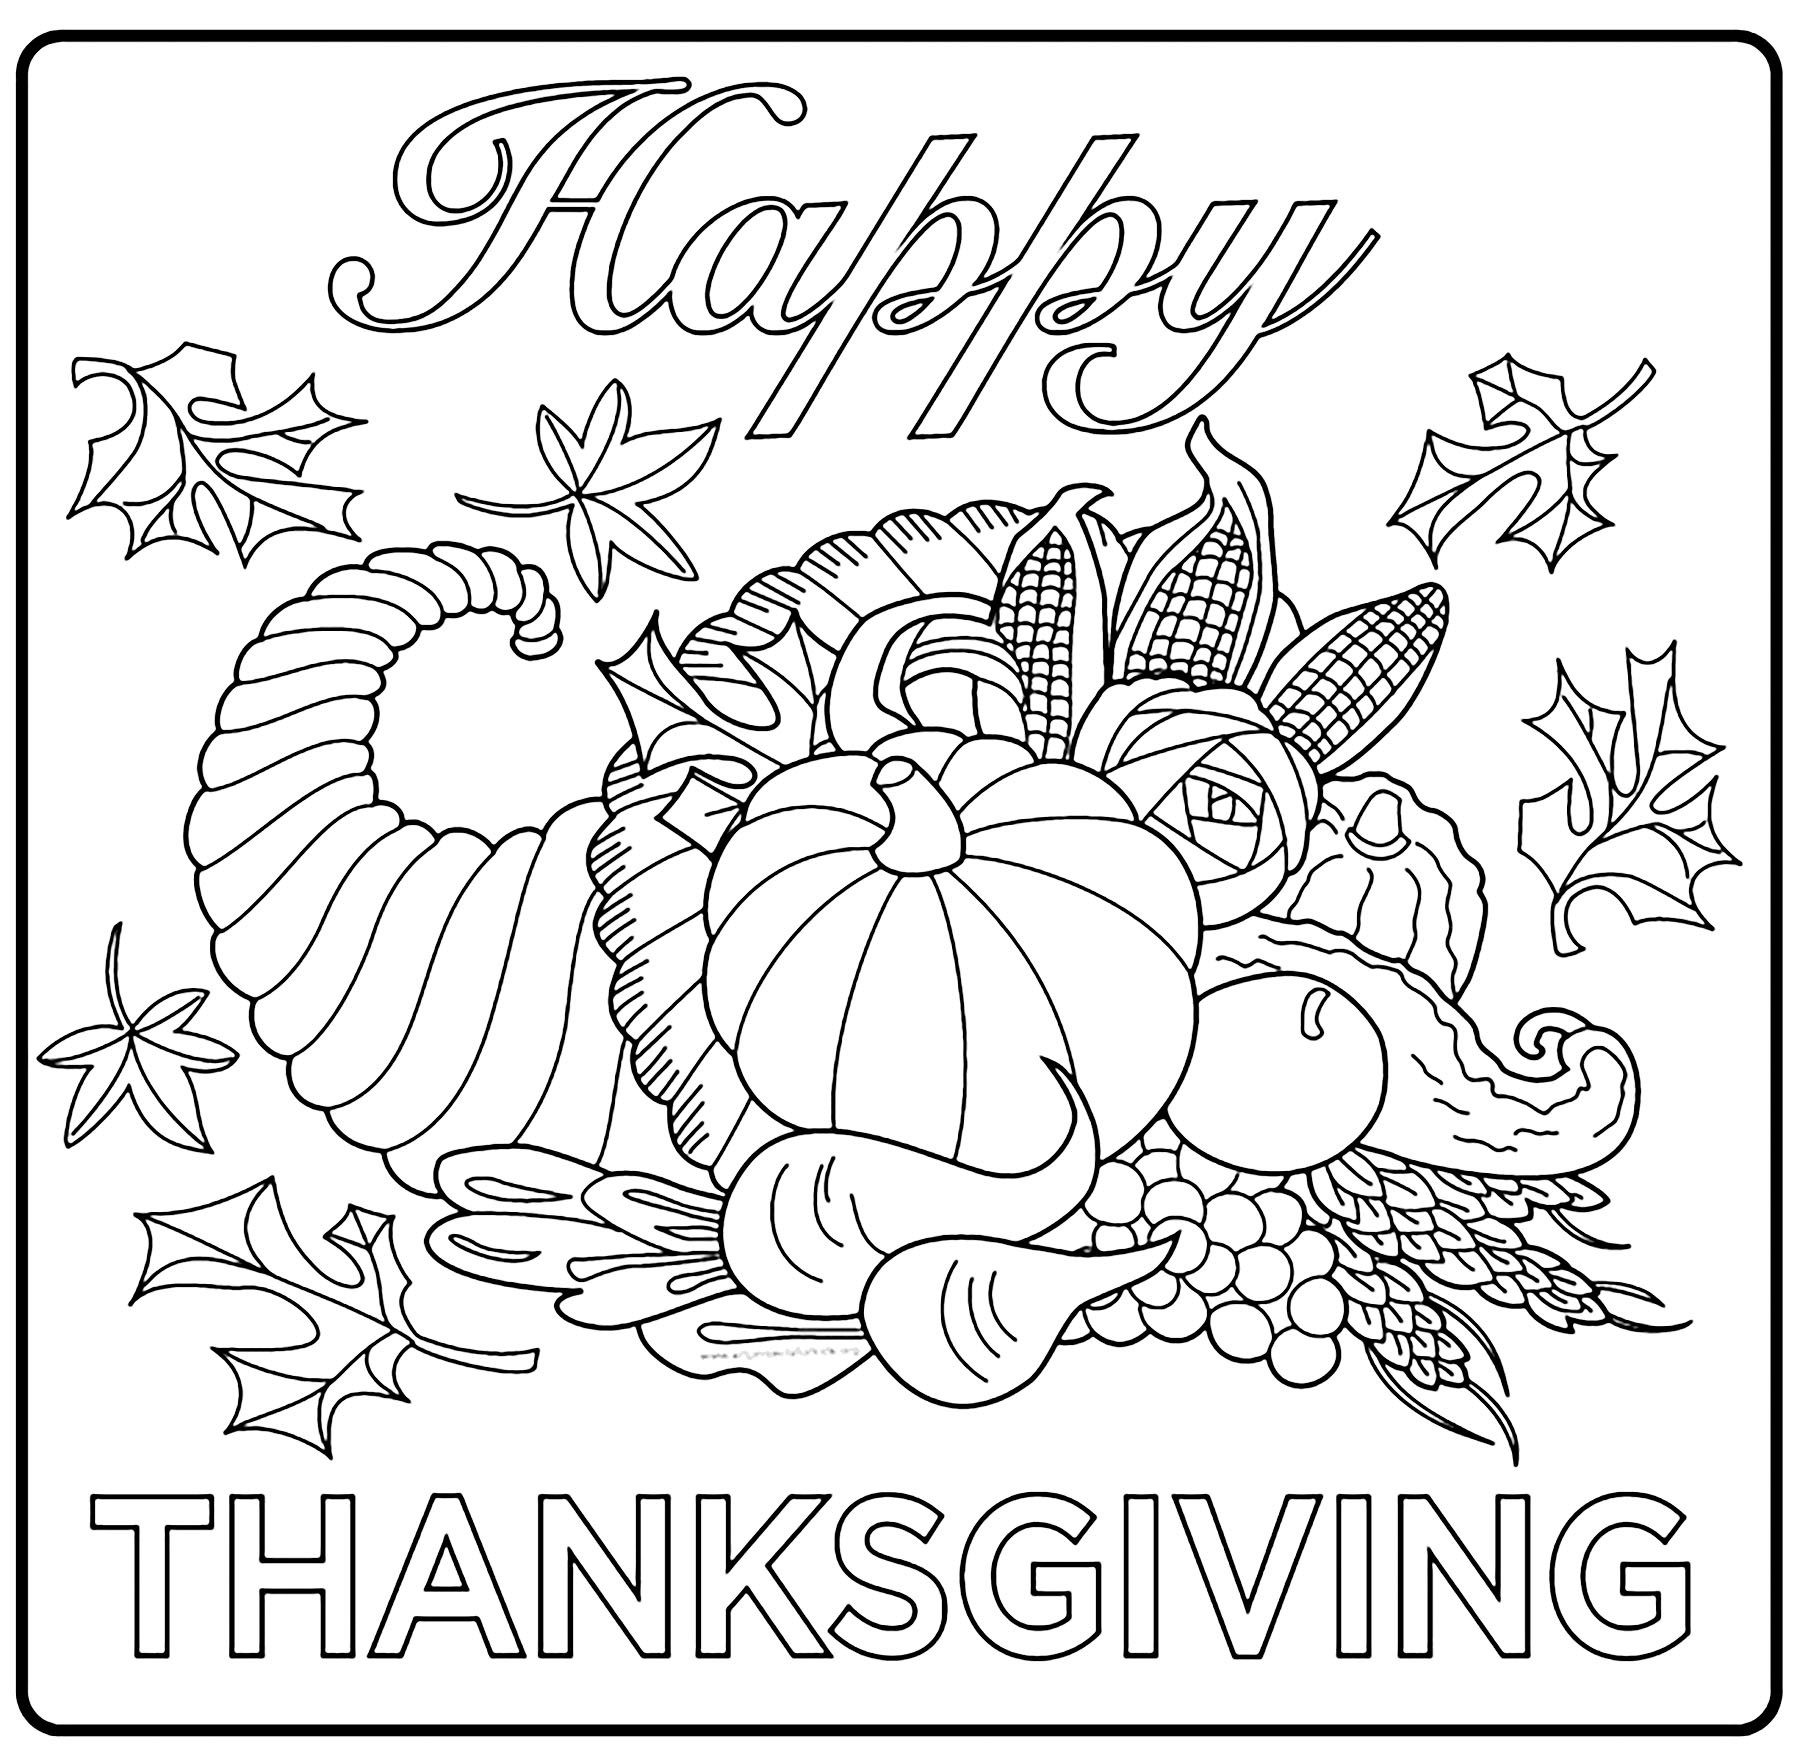 Thanksgiving Coloring Pages Kids
 Thanksgiving free to color for children Thanksgiving